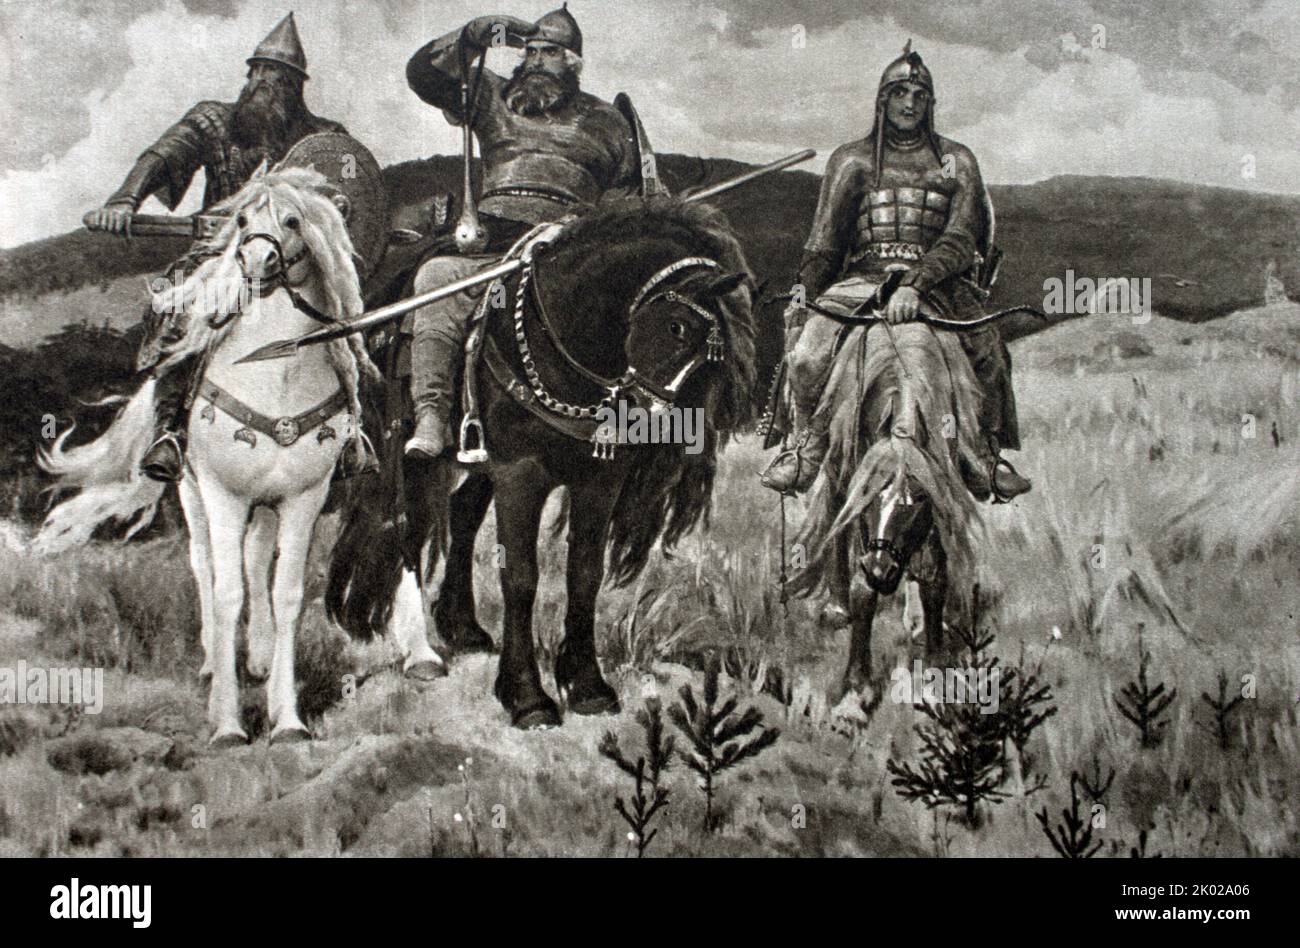 Three of the most famous bogatyrs, Dobrynya Nikitich, Ilya Muromets and Alyosha Popovich, appear together in Victor Vasnetsov's 1898 painting Bogatyrs. A bogatyr is a character in medieval East Slavic legends, akin to a Western European knight-errant. Stock Photo